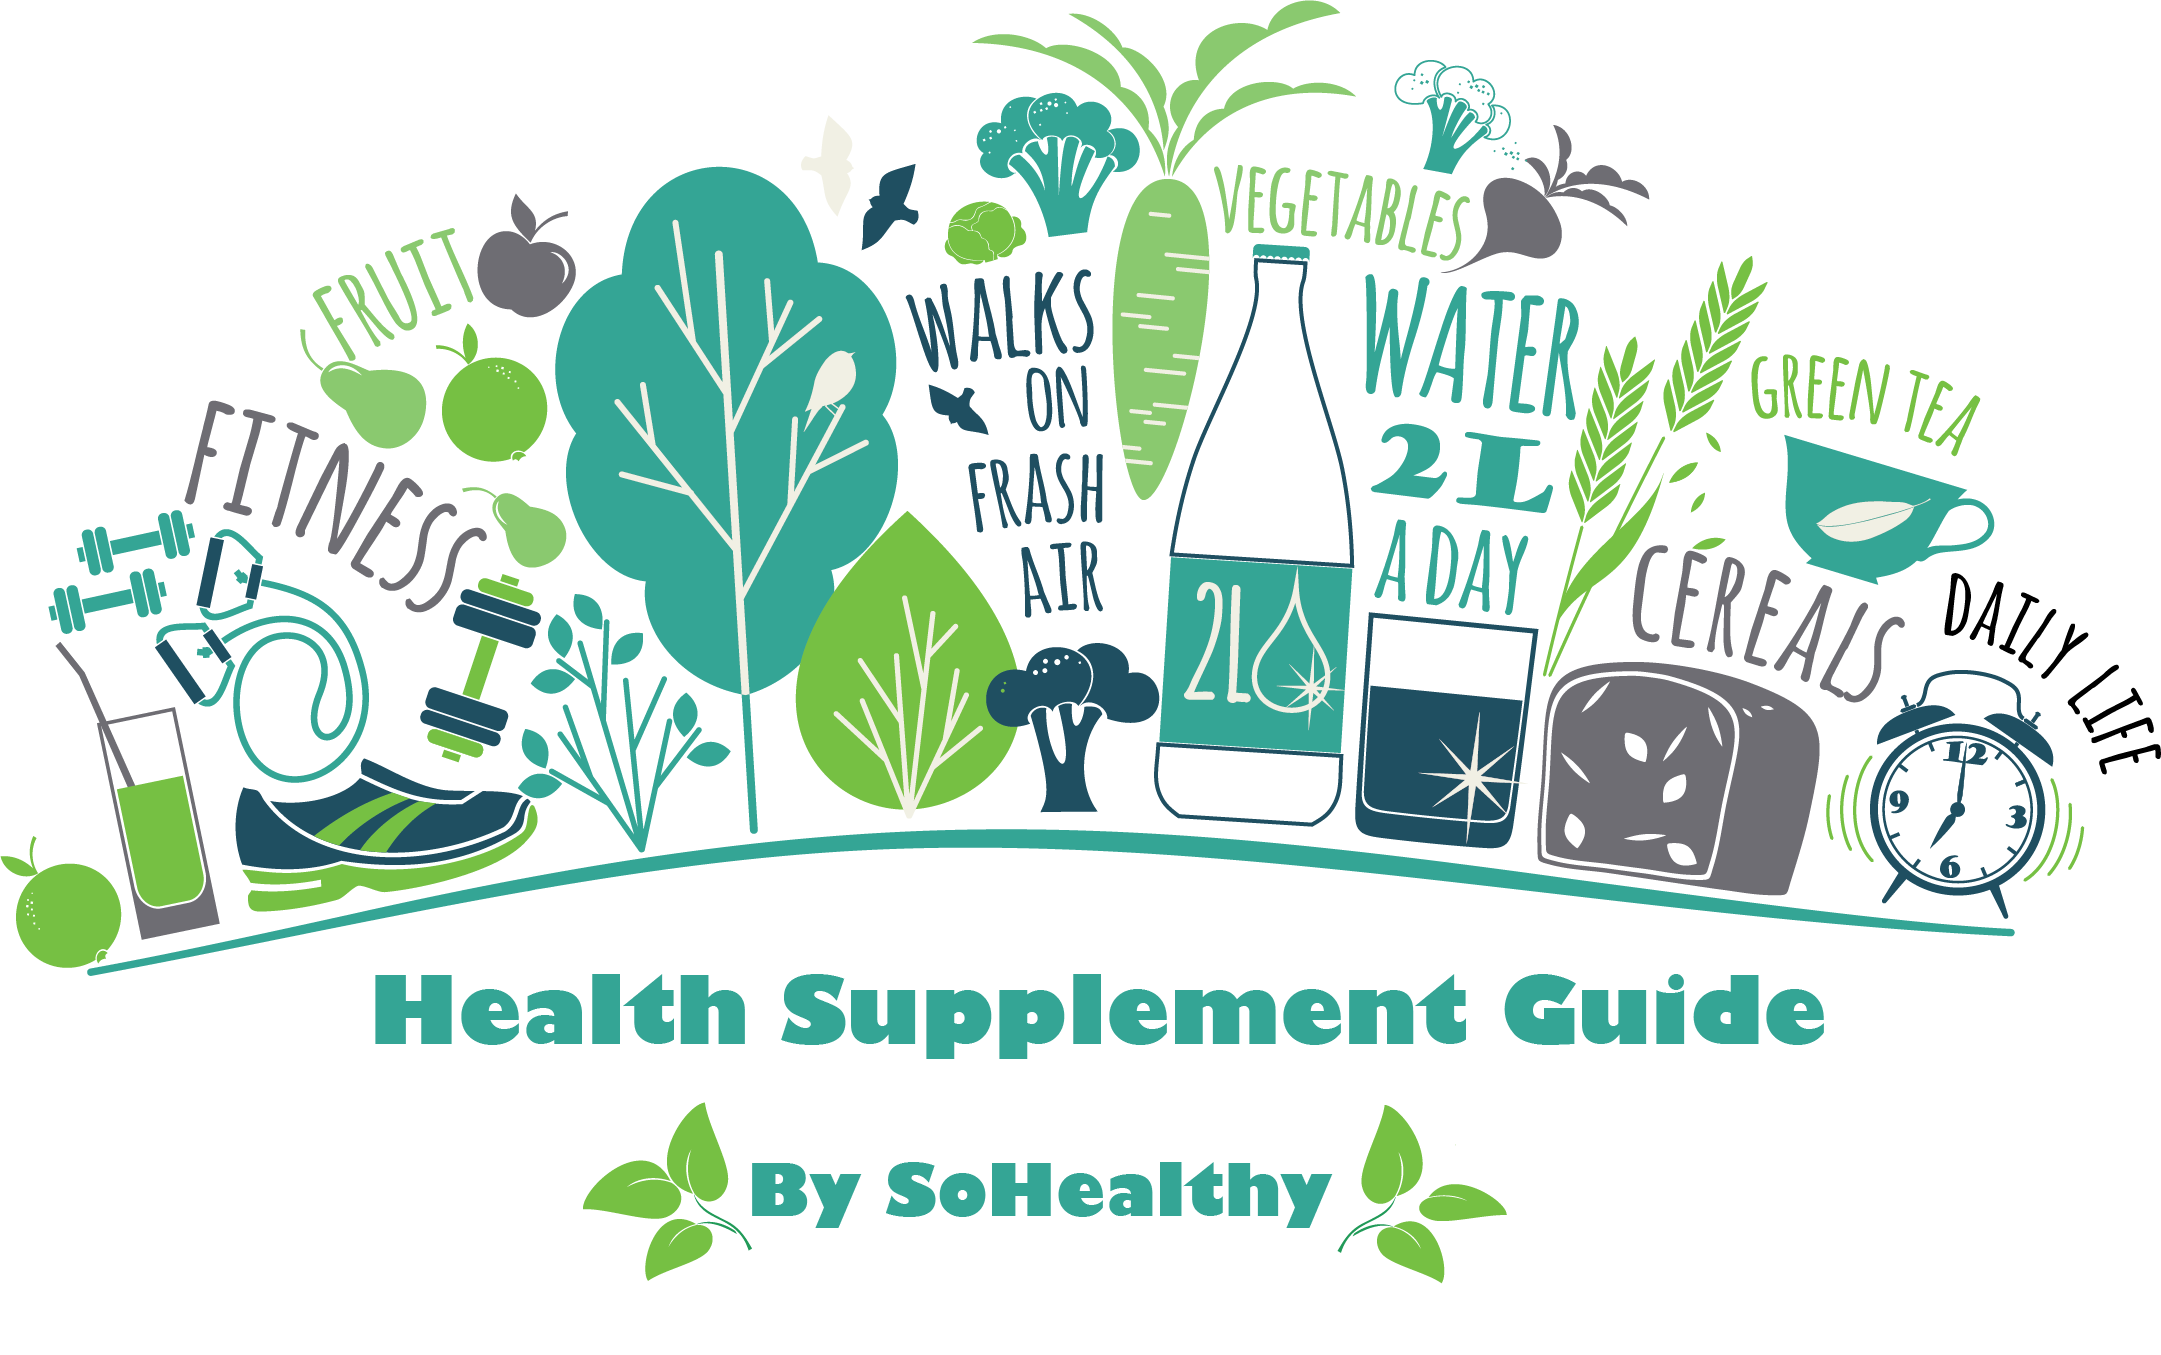 A-Z Health Supplement guide by SoHealthy